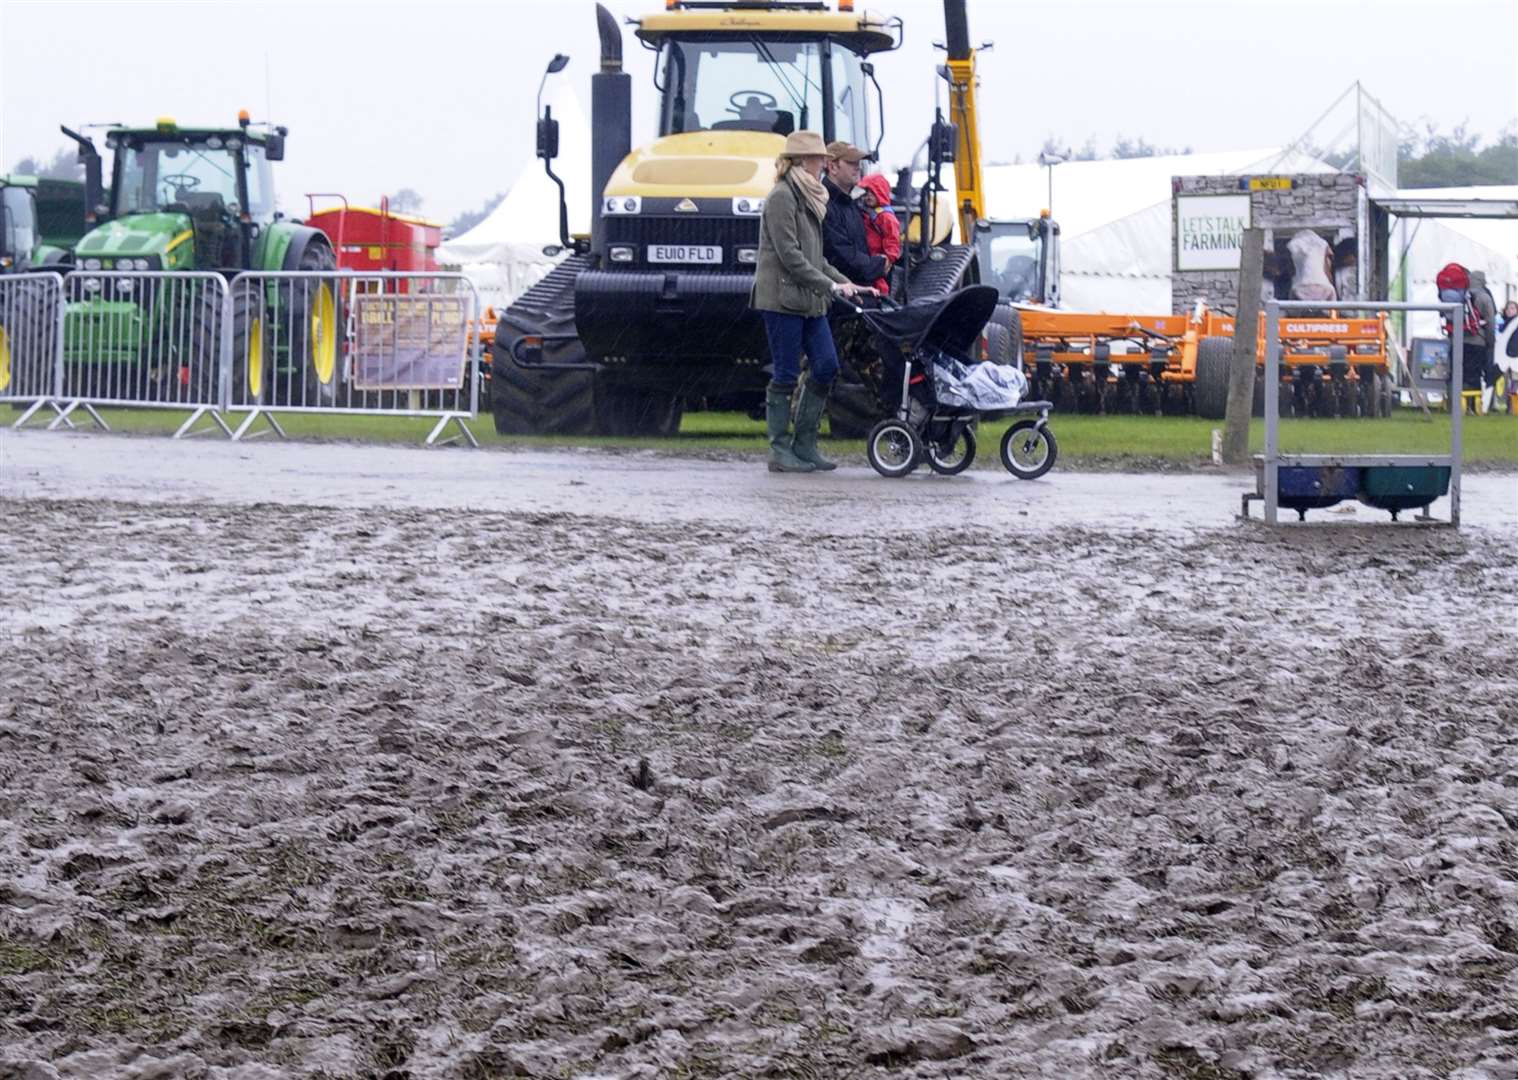 Summer of 2012: Kent Show becomes a mud bath after torrential rain